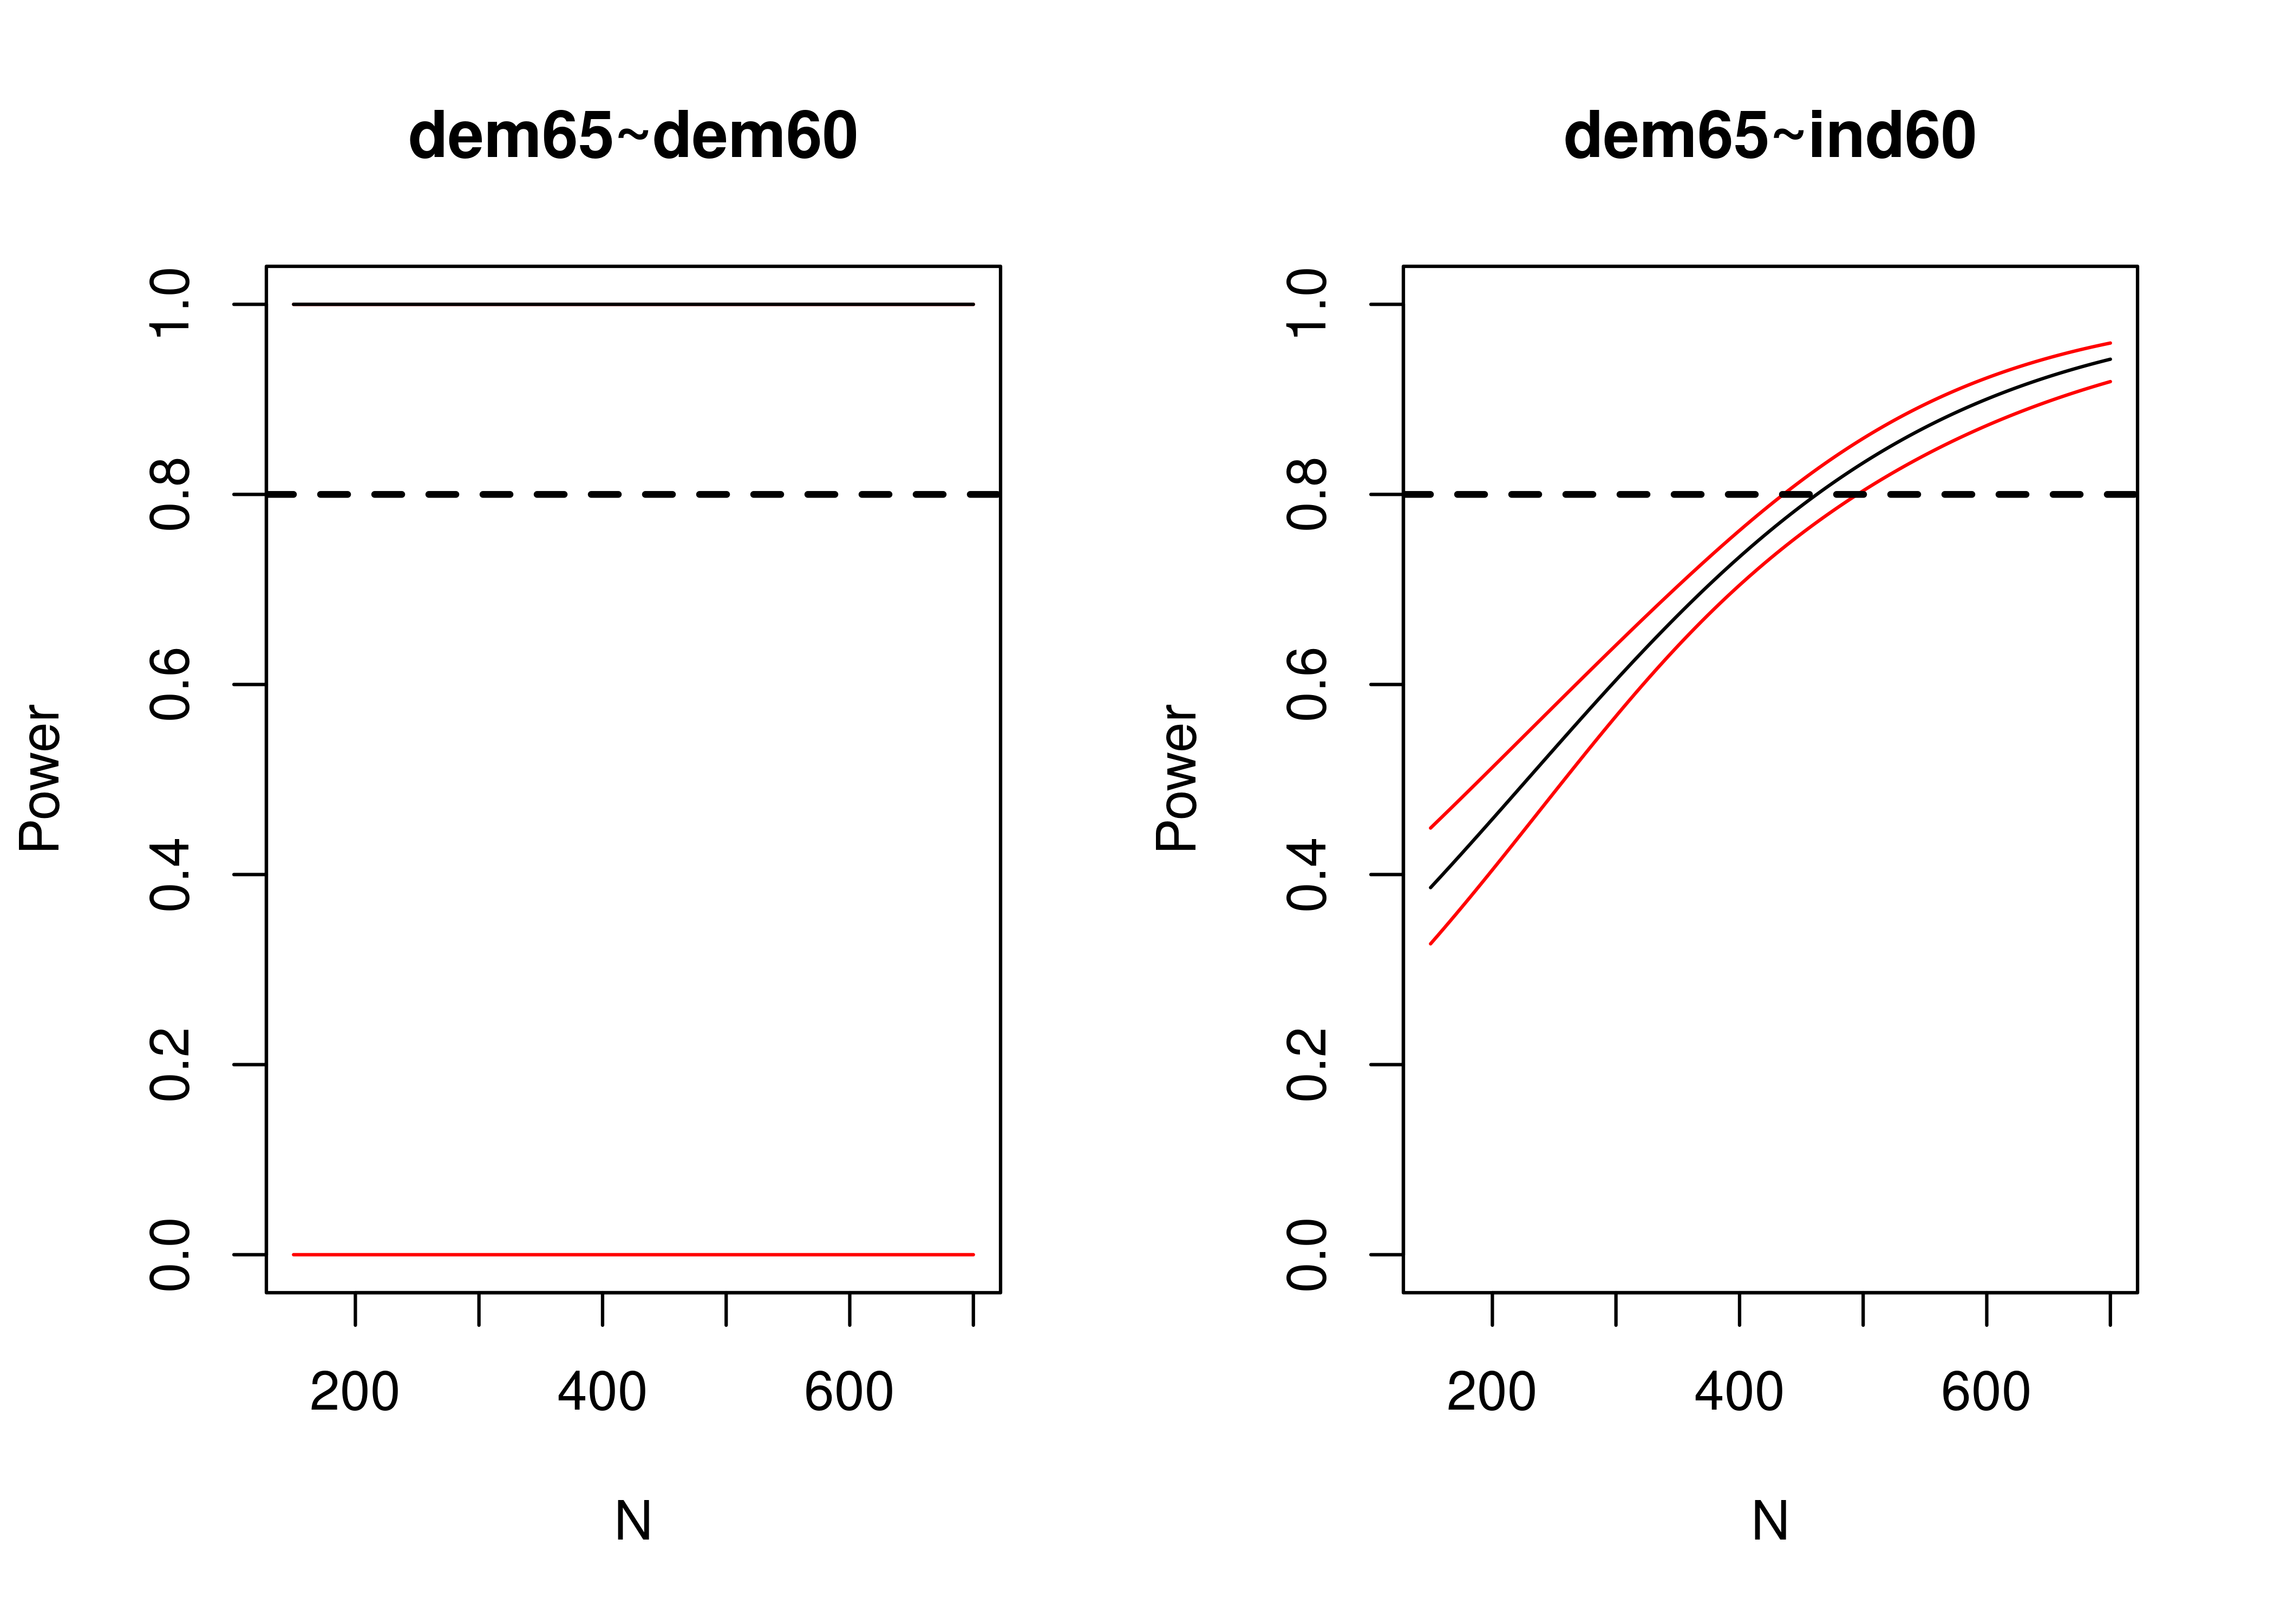 Plot of Power to Detect Various Parameters as a Function of Sample Size, From Monte Carlo Power Analysis.